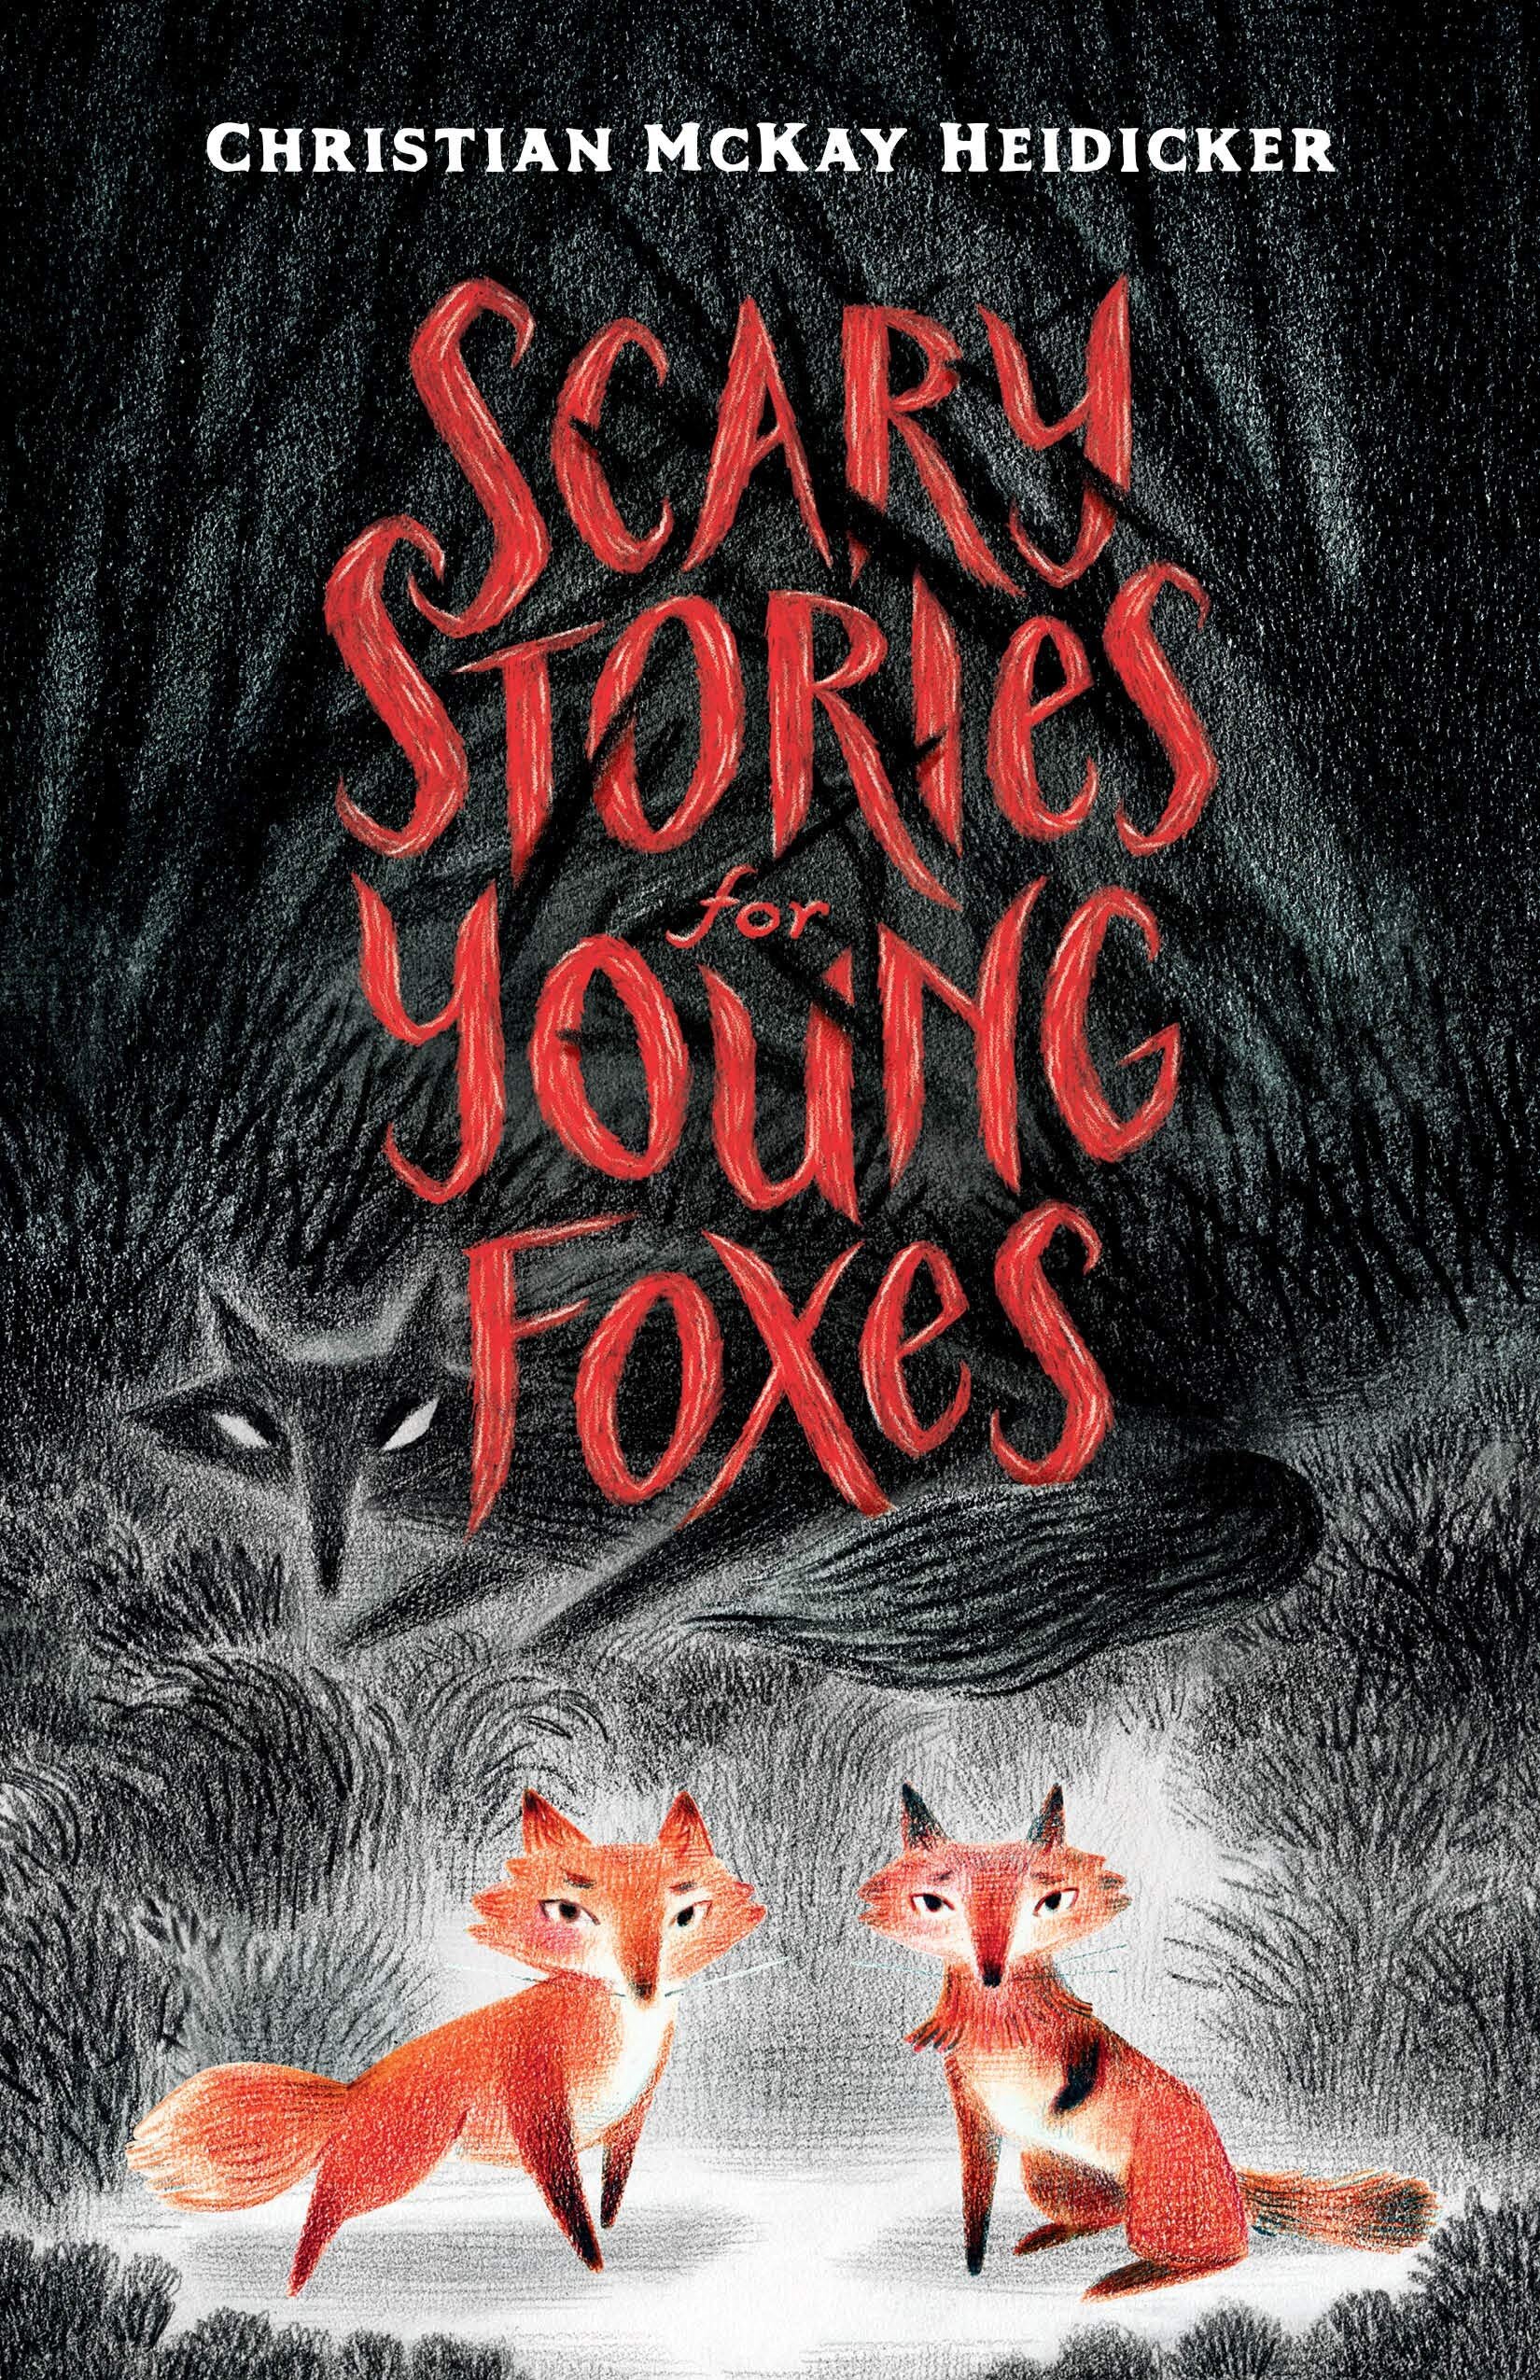 Scary Stories for Young Foxes – Christian McKay Heidicker